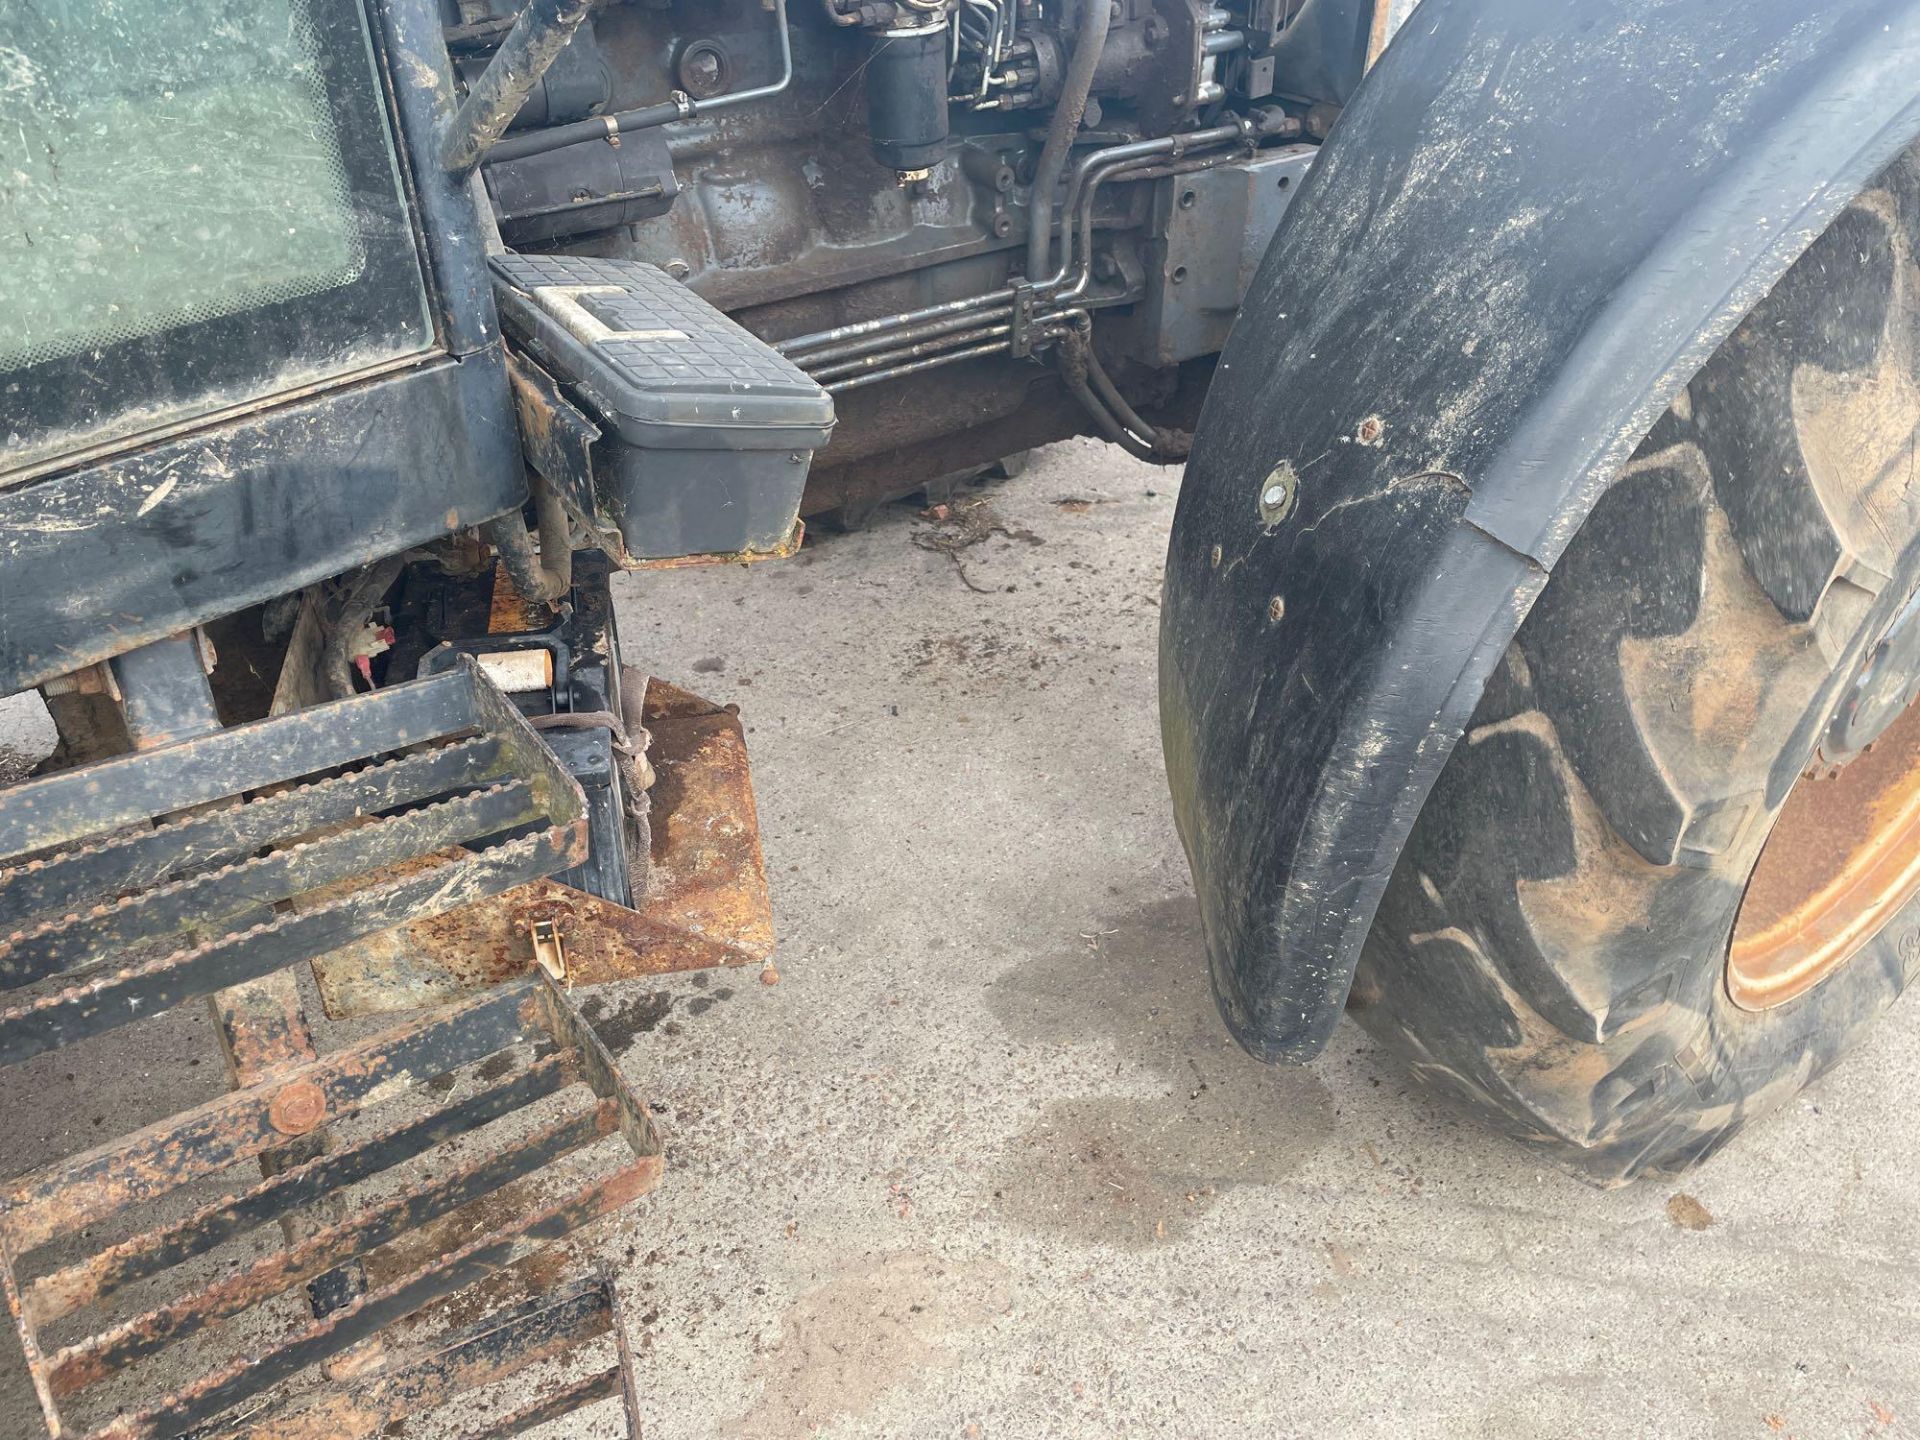 1997 New Holland 8340 4wd tractor with 2 manual spools on 14.9R28 front and 18.4R38 rear wheels and - Image 14 of 22